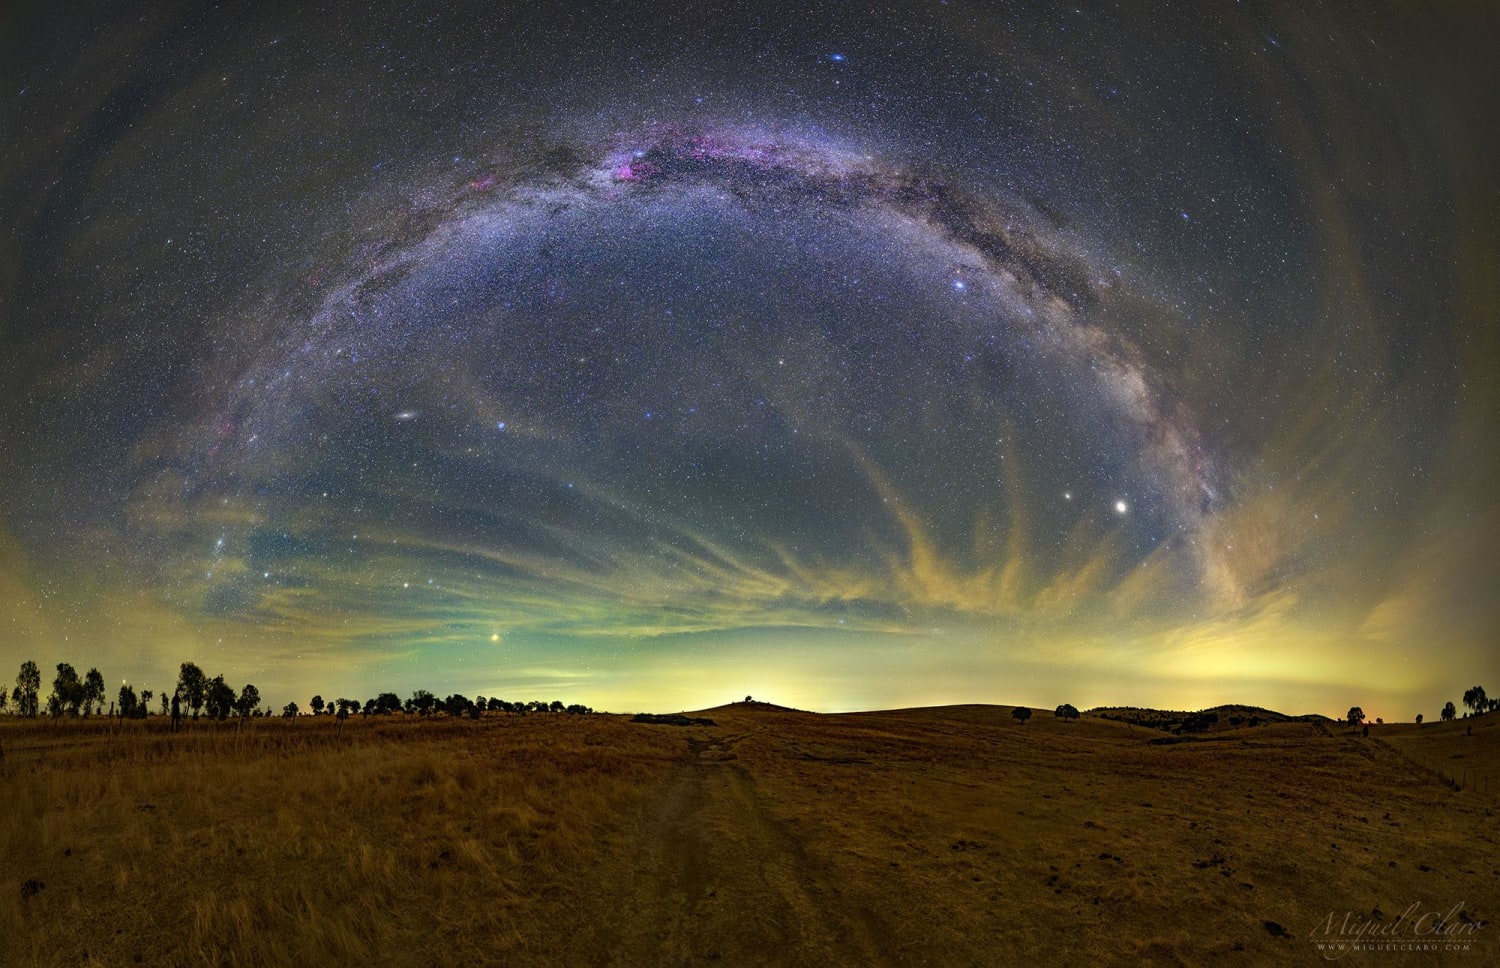 The mission was to document night-flying birds -- but it ended up also documenting a beautiful sky. The featured wide-angle mosaic was taken over the steppe golden fields in Mértola, Portugal in 2020.